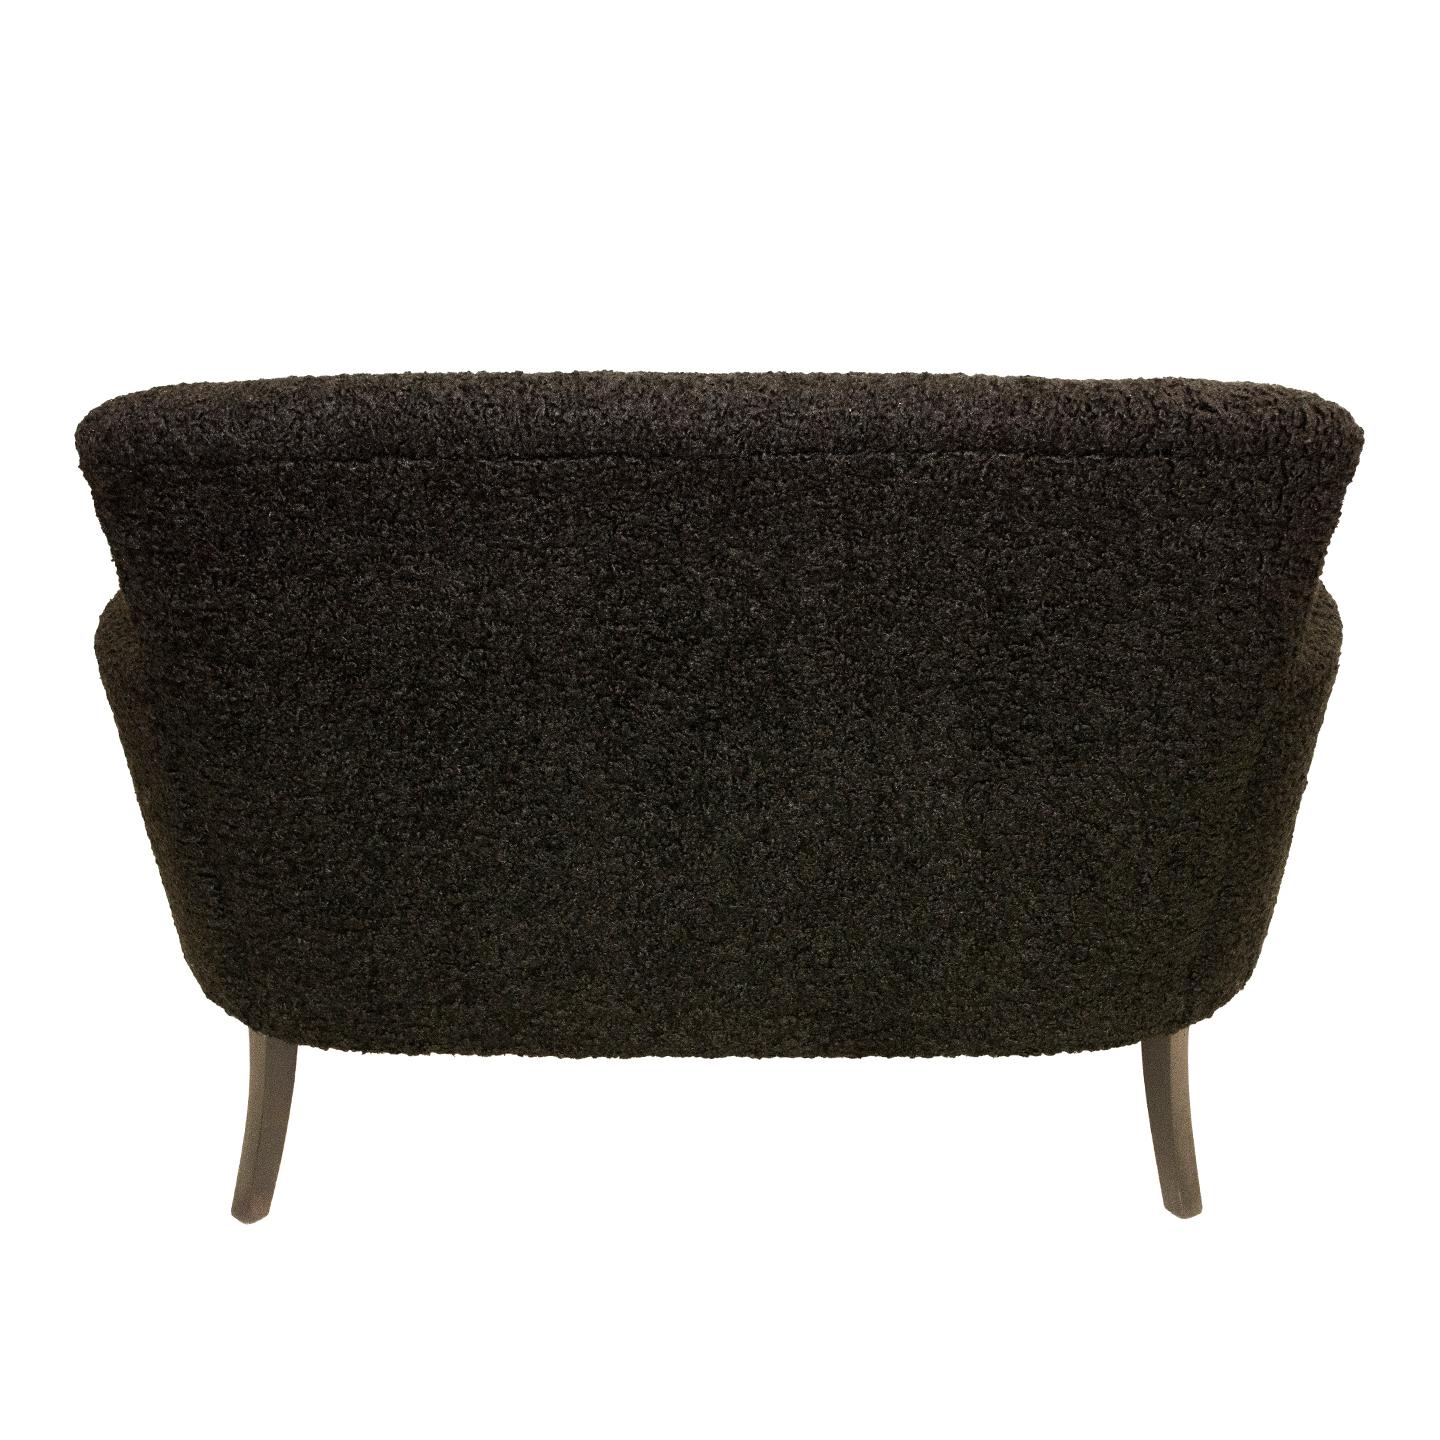 American Petite French Style Settee in Noir Faux Shearling